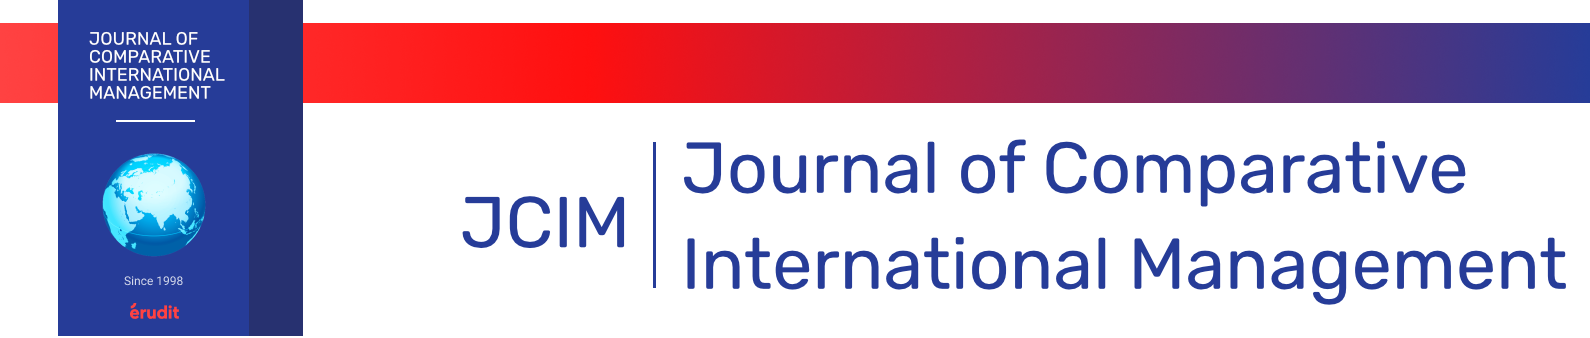 a header image with book cover, the name of the journal twice, and the initials of the journal